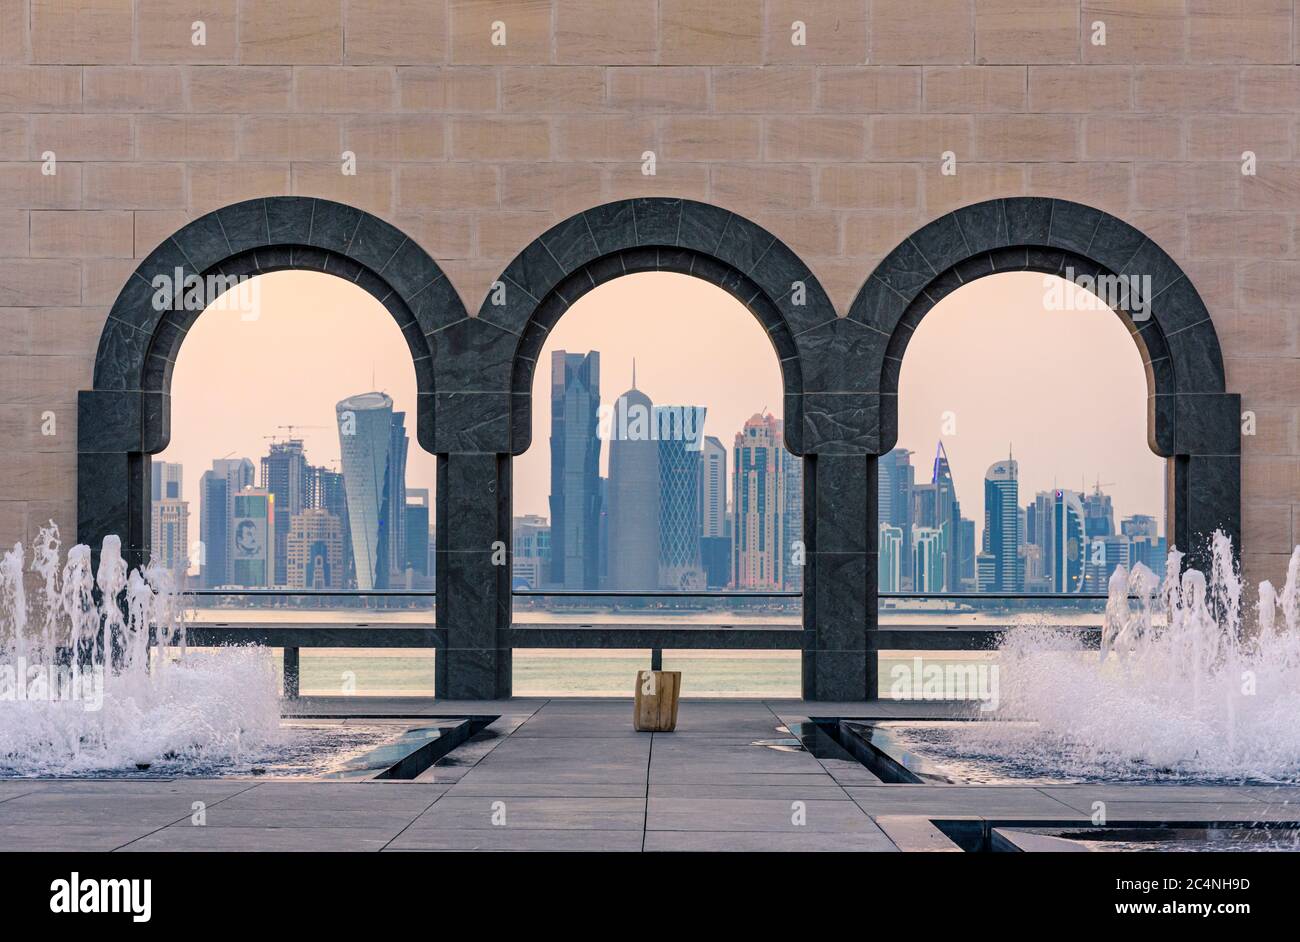 Doha city skyline views at sunset through the arches of the courtyard at the Museum of Islamic Art, Doha, Qatar Stock Photo